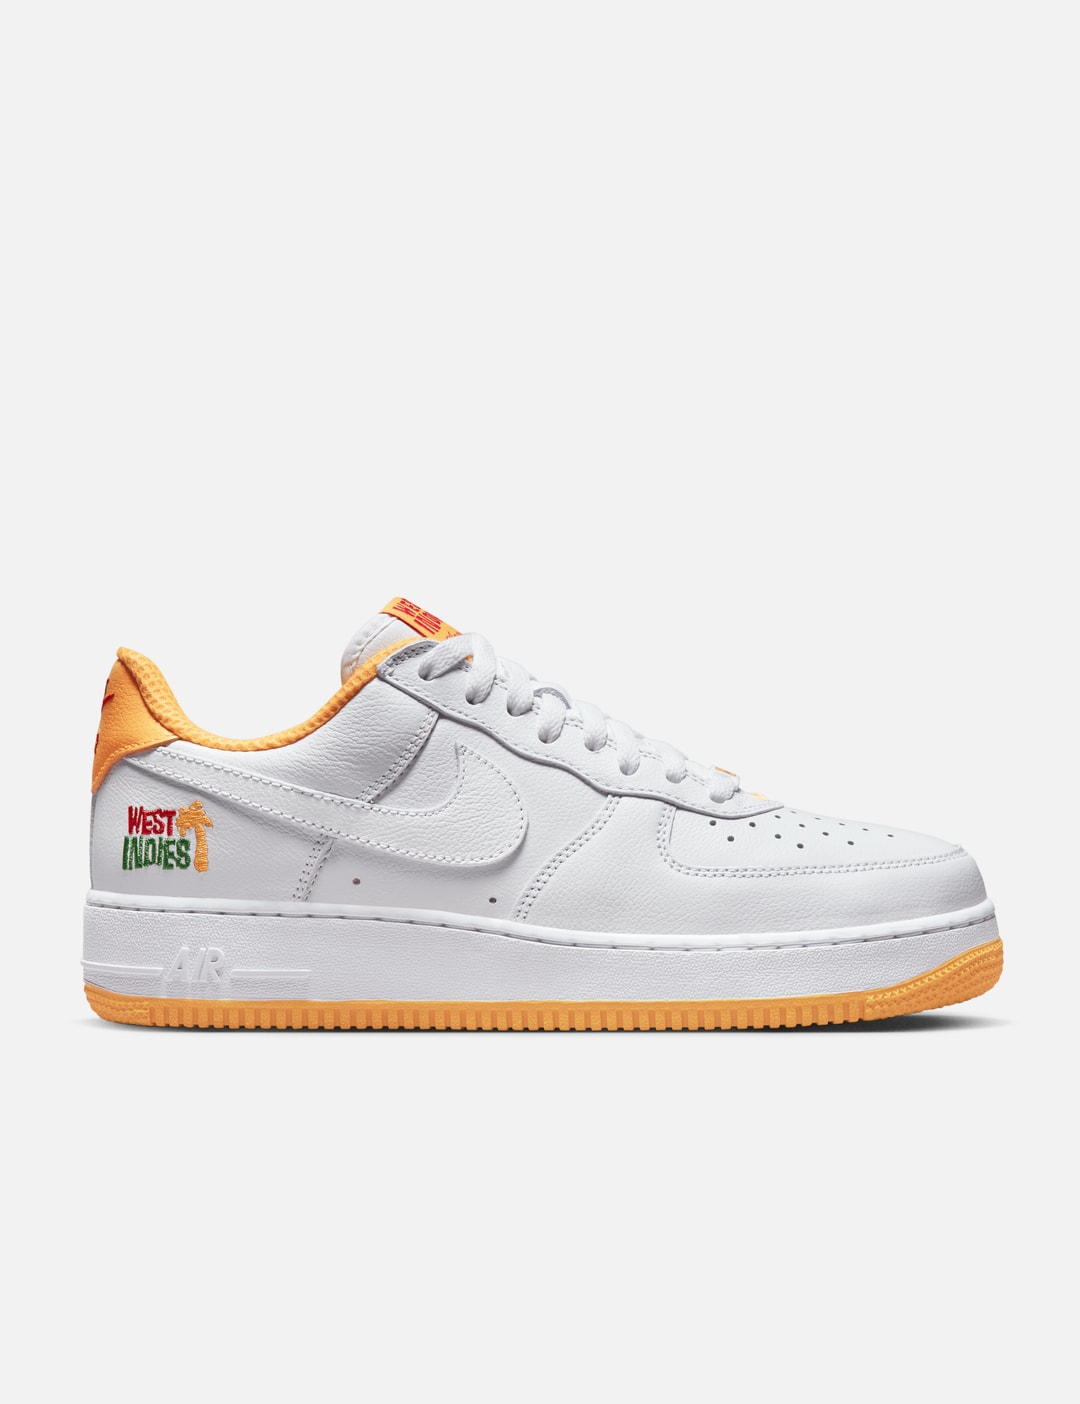 Nike - Air Force 1 Low West Indies | HBX - Globally Curated Fashion and ...